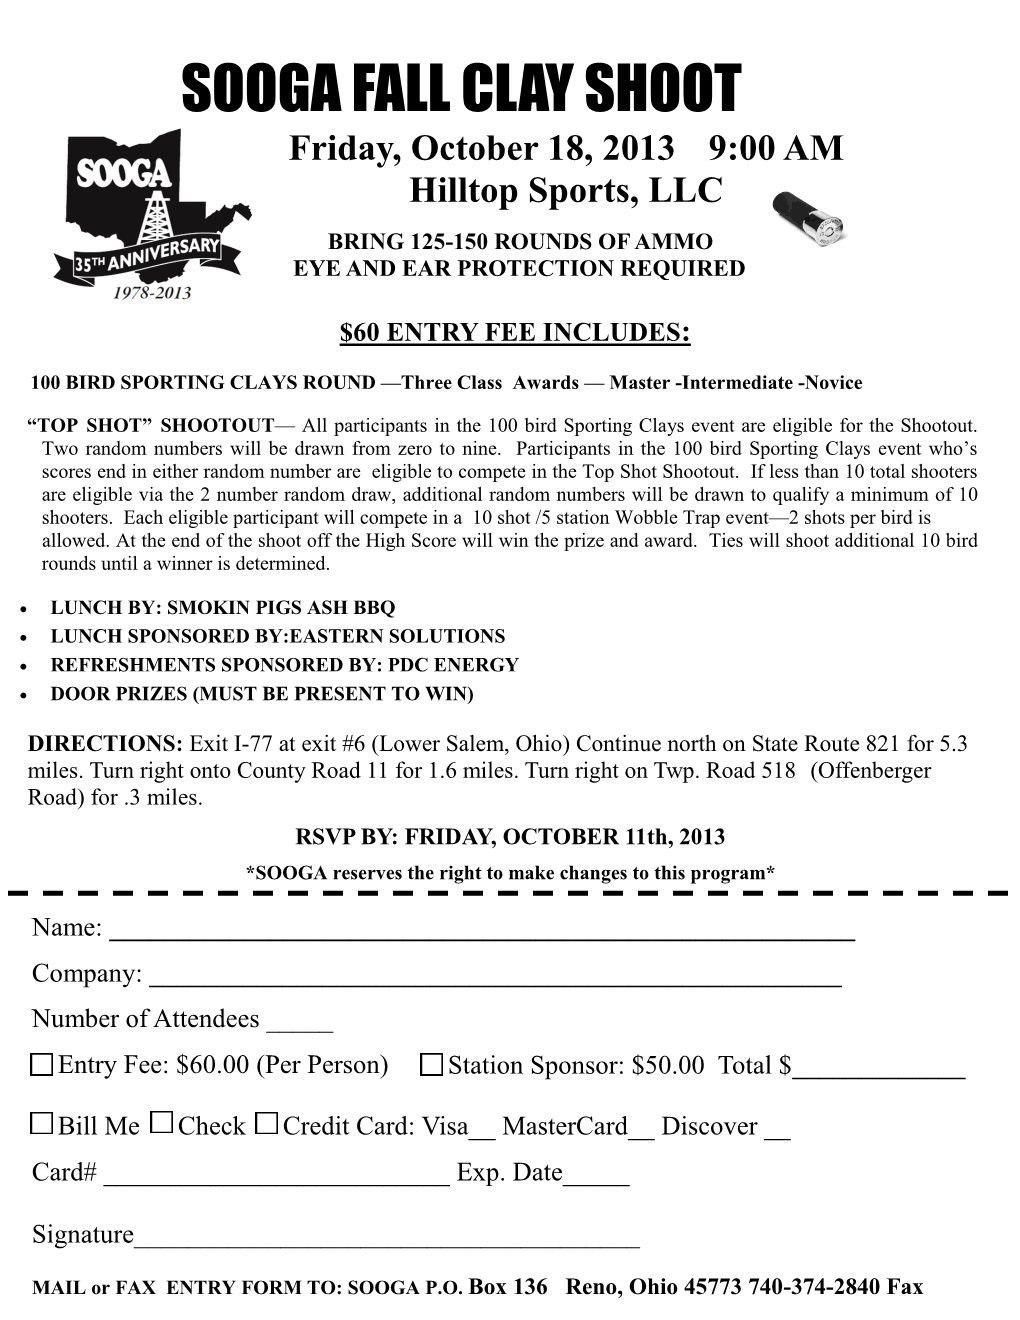 SOOGA FALL CLAY SHOOT Friday, October 18, 2013 9:00 AM Hilltop Sports, LLC BRING 125-150 ROUNDS of AMMO EYE and EAR PROTECTION REQUIRED